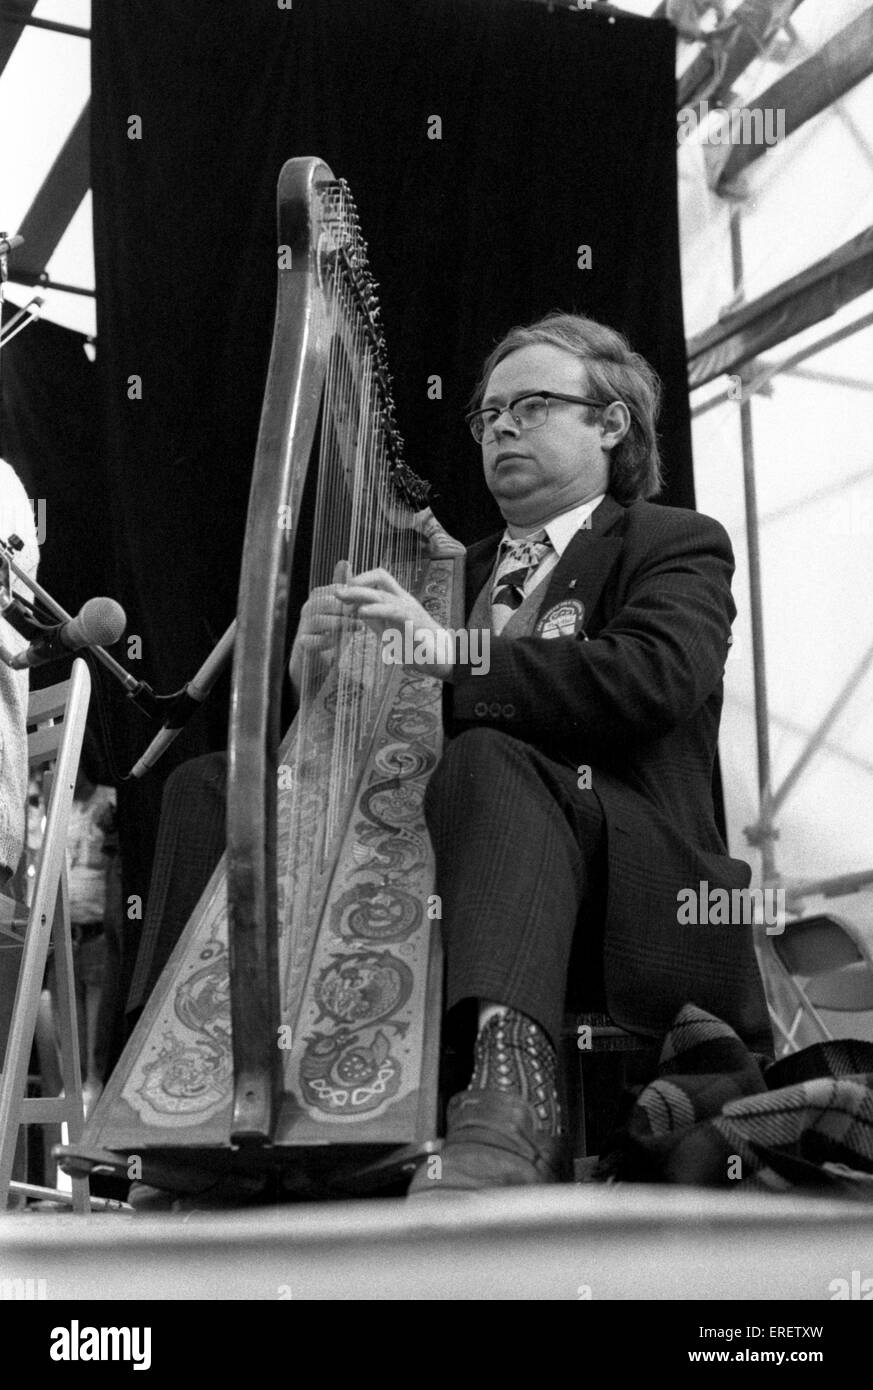 Chieftains' harpist Derek Bell, MBE  performing at the July Wakes folk festival in Chorley, Lancashire, on 25 July 1976.    DB: Stock Photo